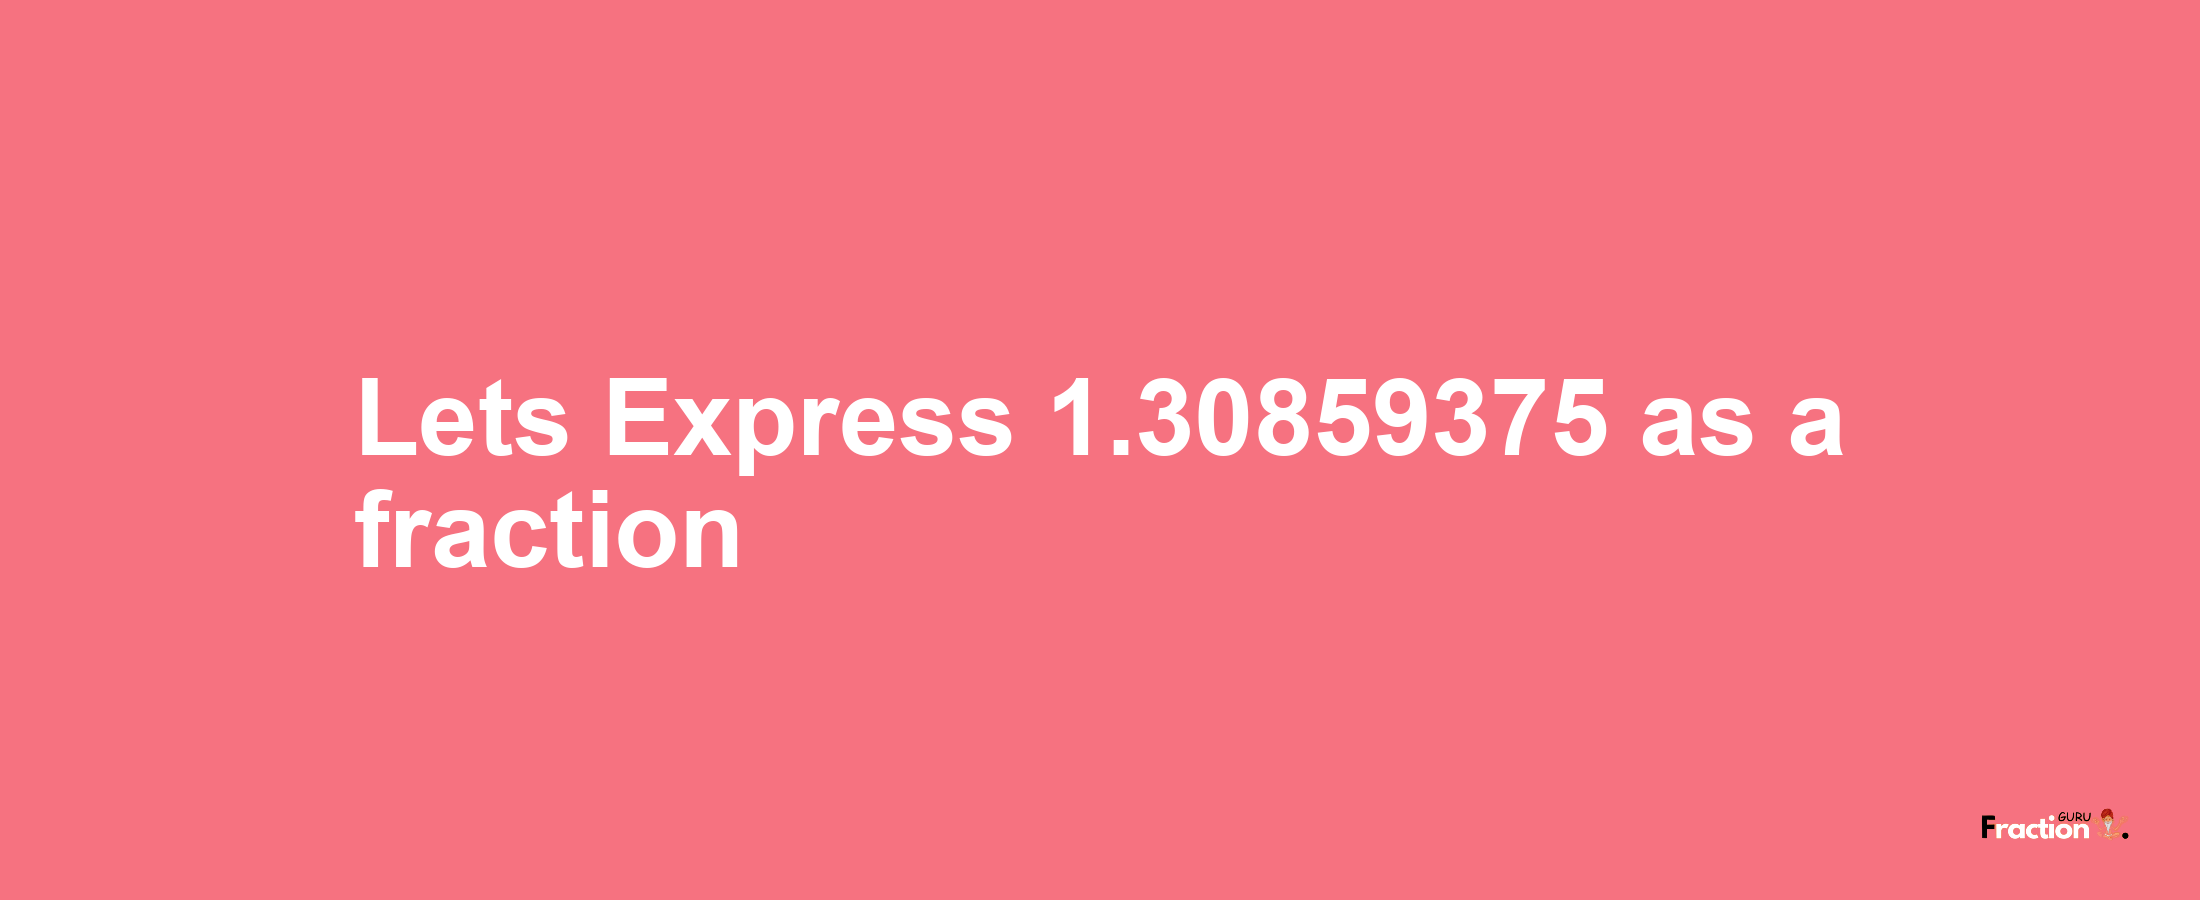 Lets Express 1.30859375 as afraction